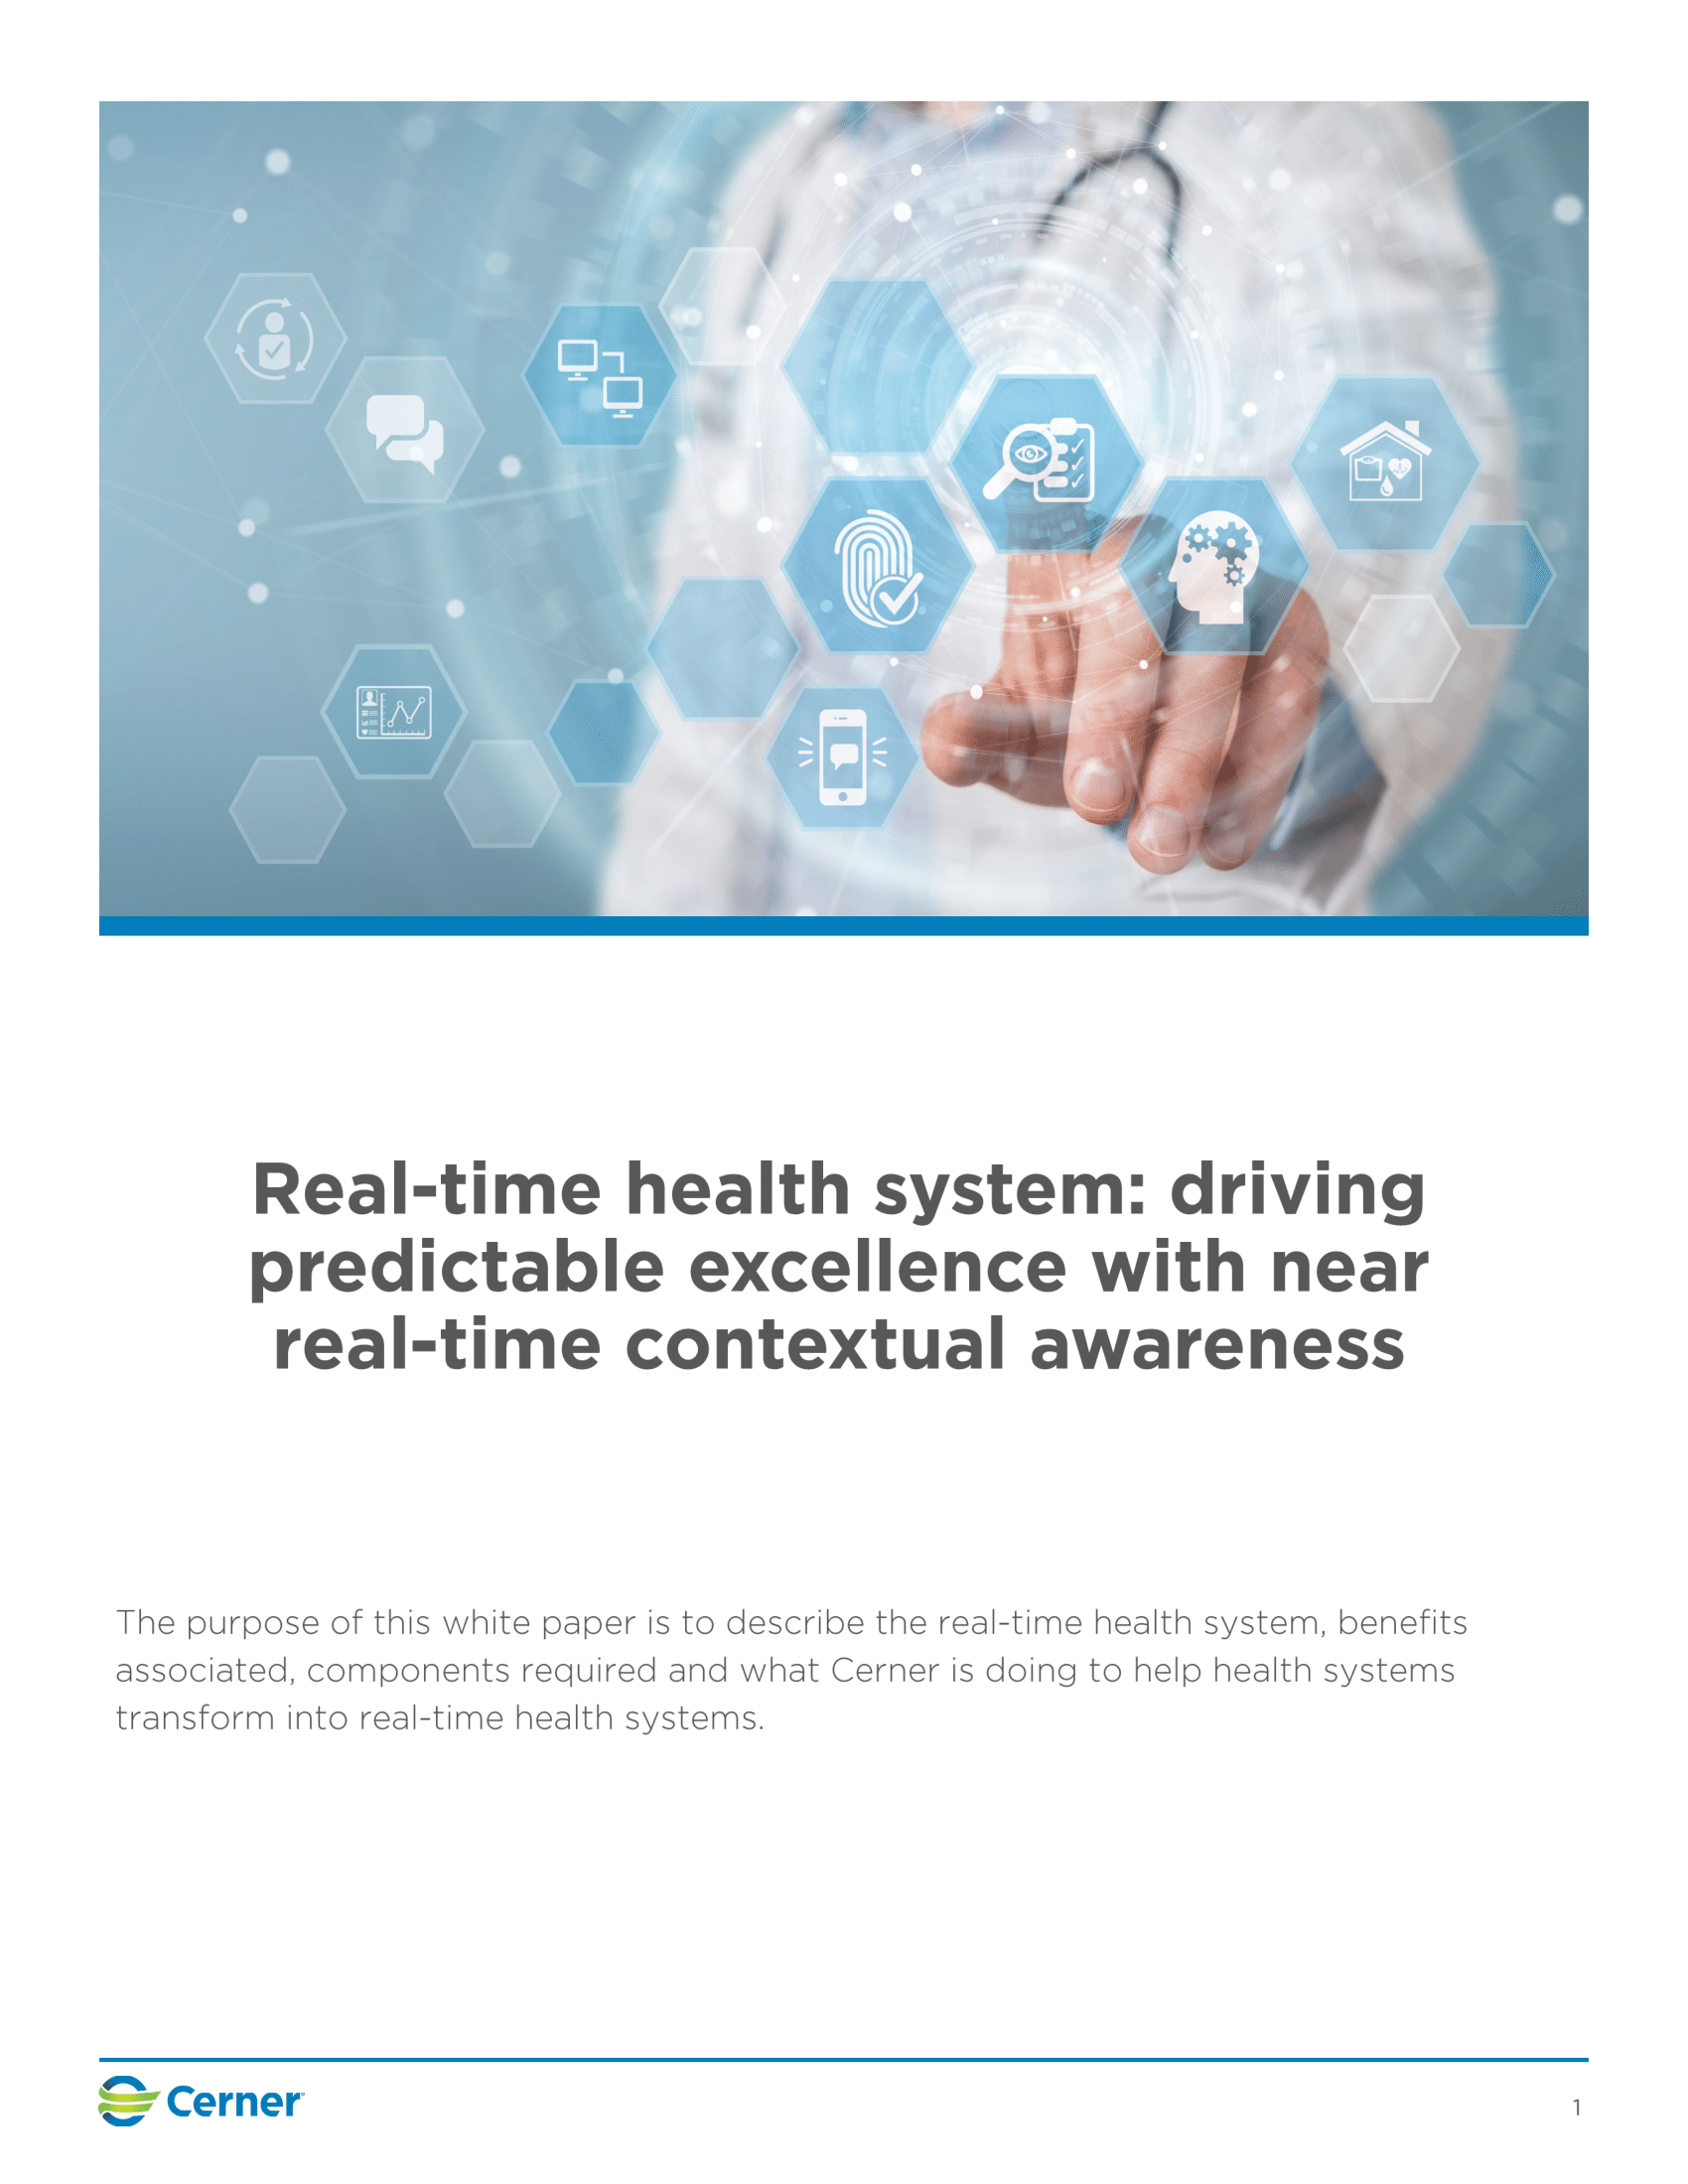 Real-Time Health System Business Brief